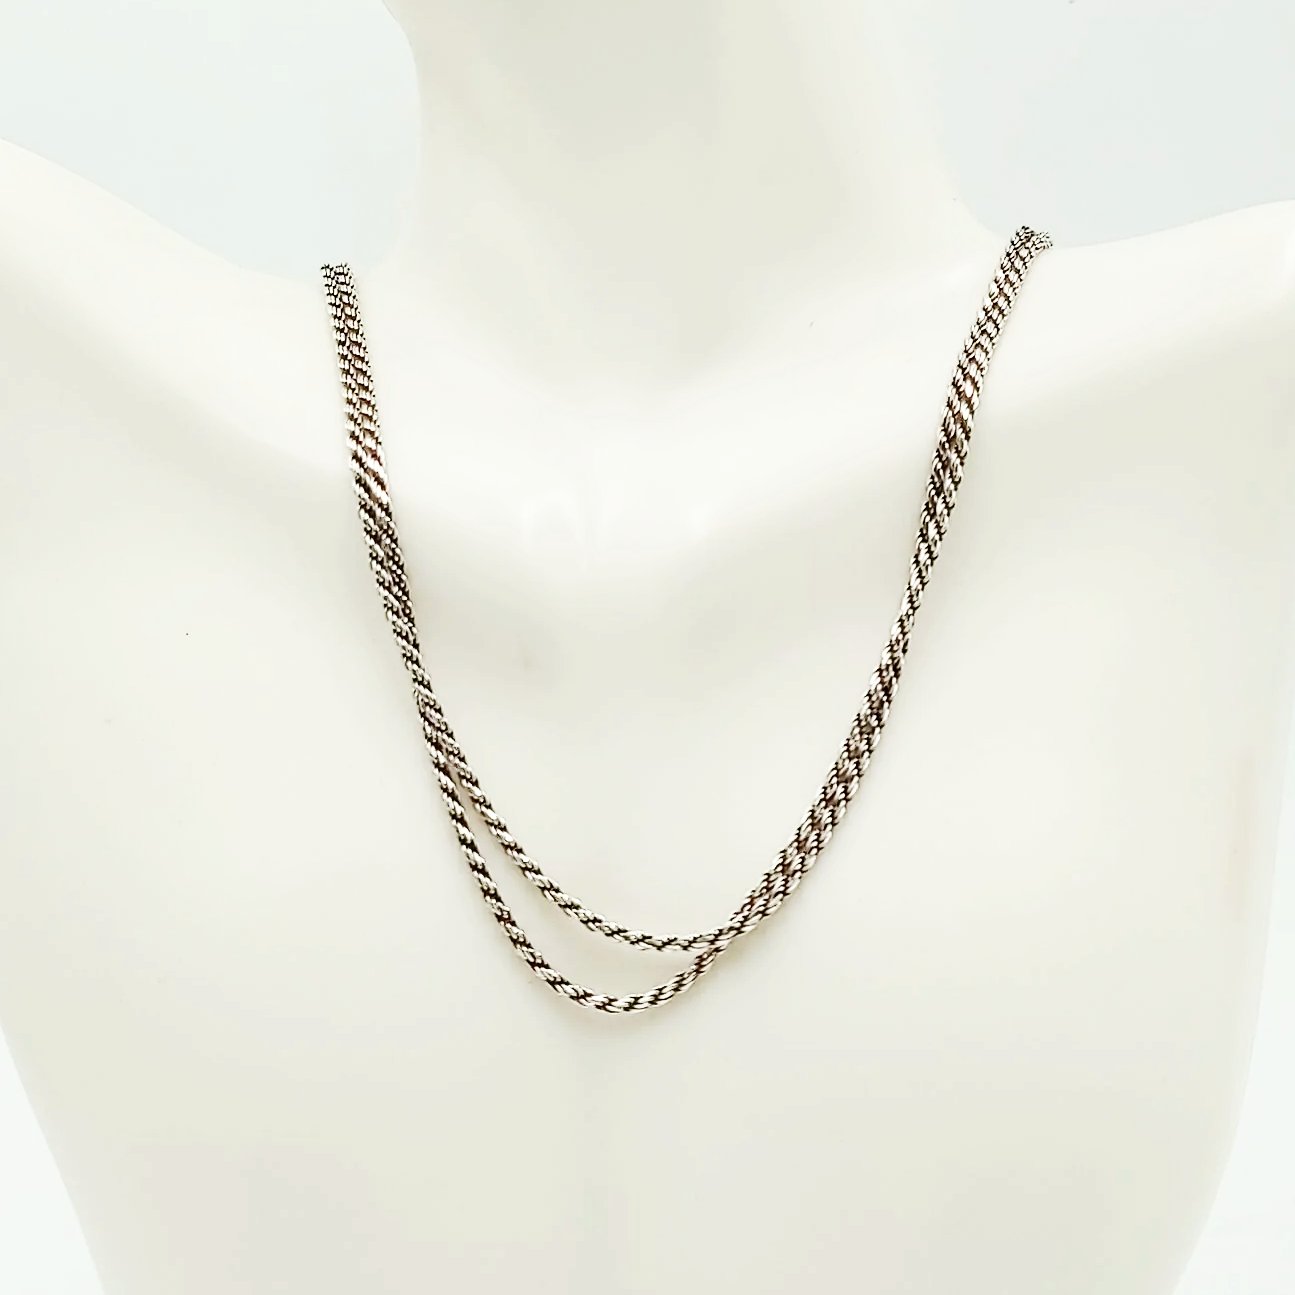 Silver Rope Chain 3' 36" Long Necklace Sterling 925